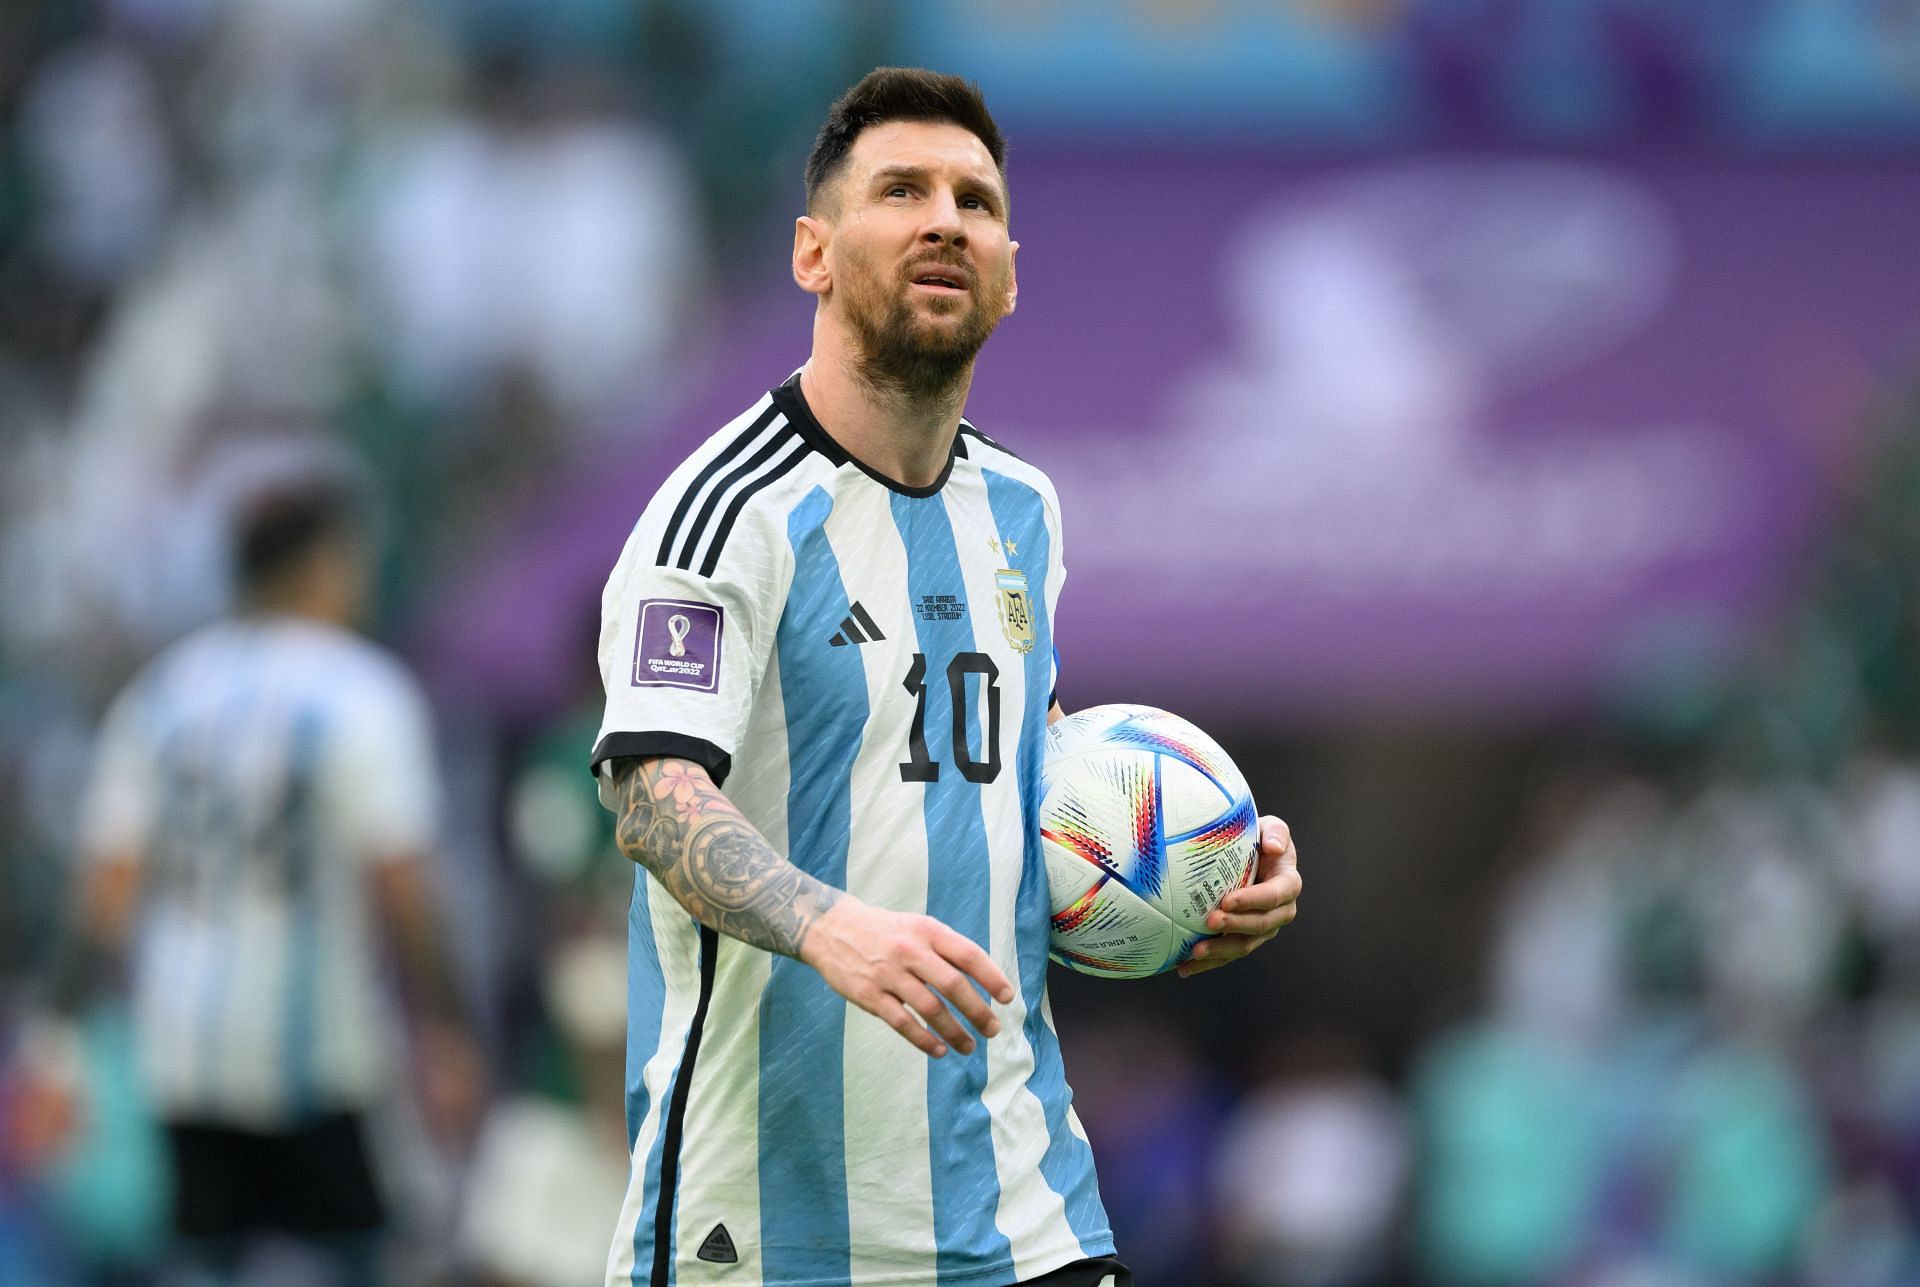 Lionel Messi needs to turn things around with Argentina